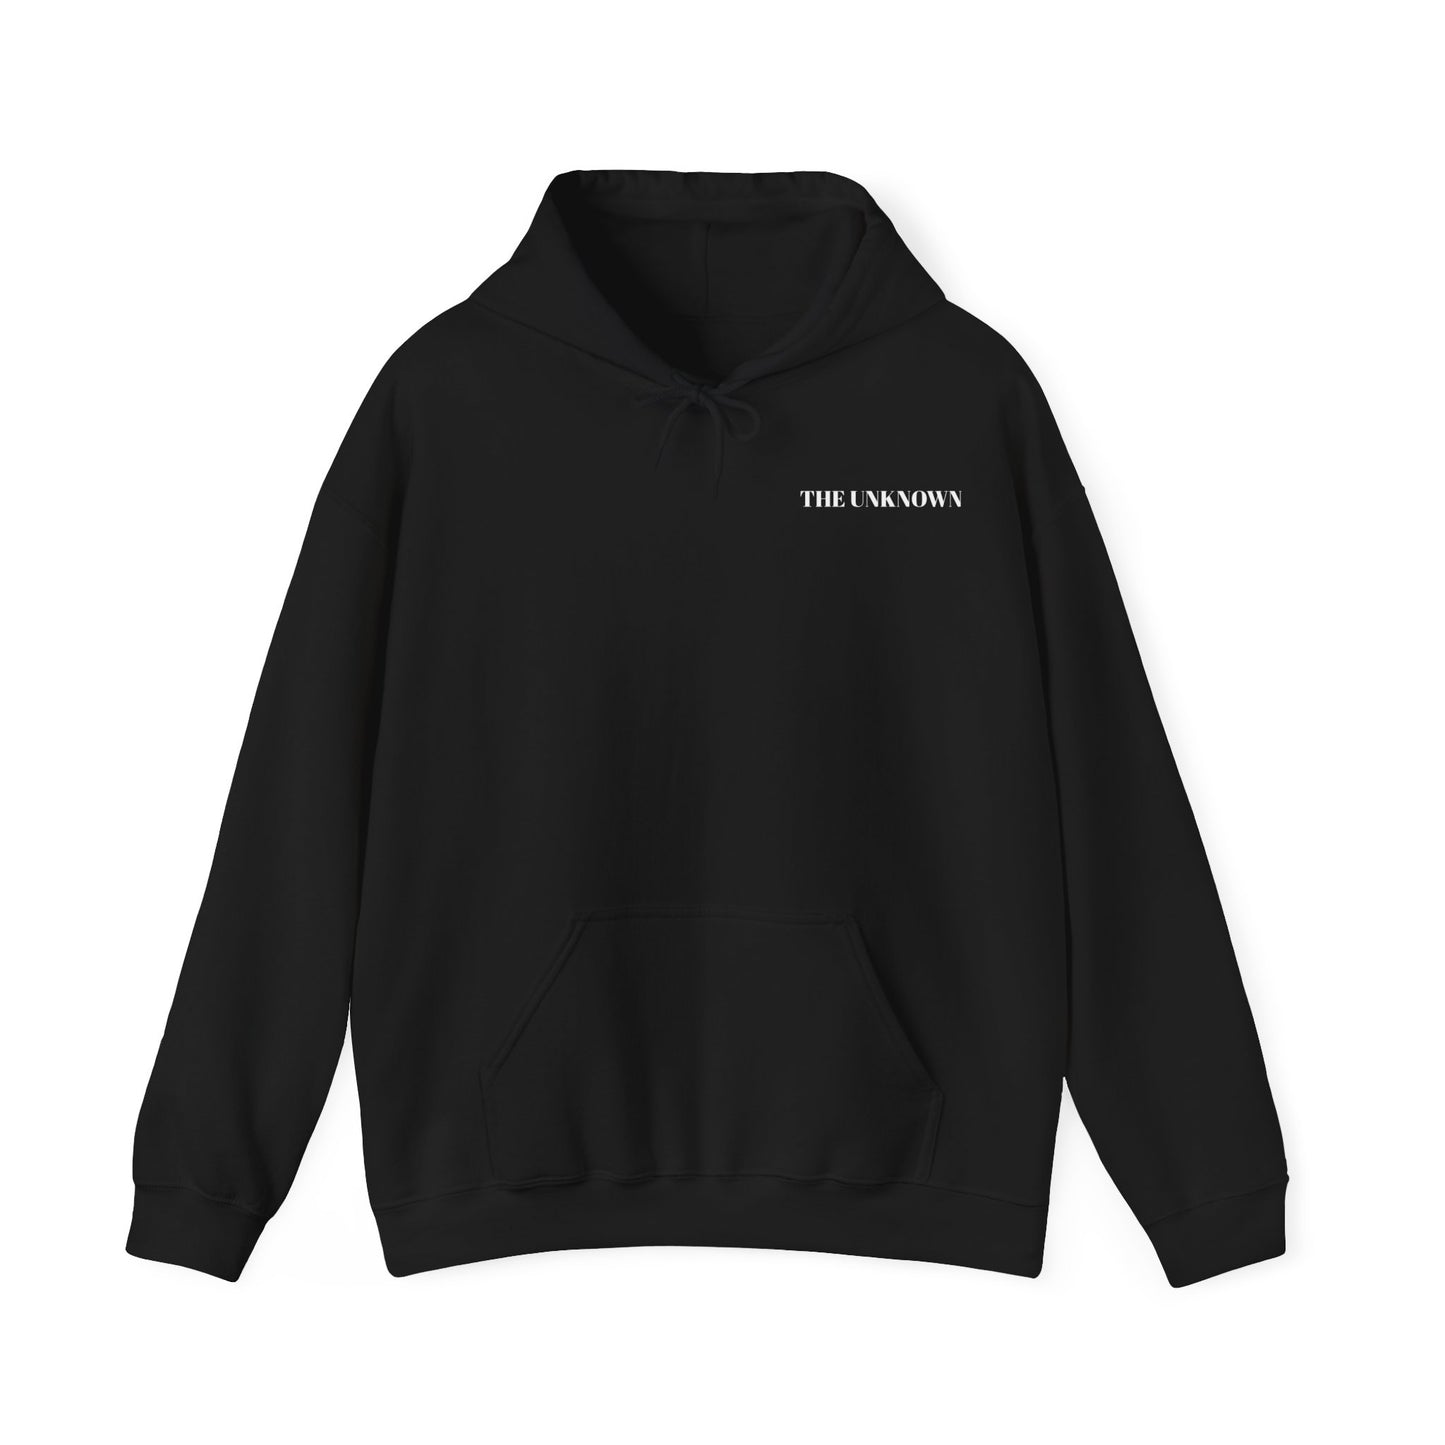 Unisex Heavy Blend Hoodie with The Unknown Design Comfort Fit14